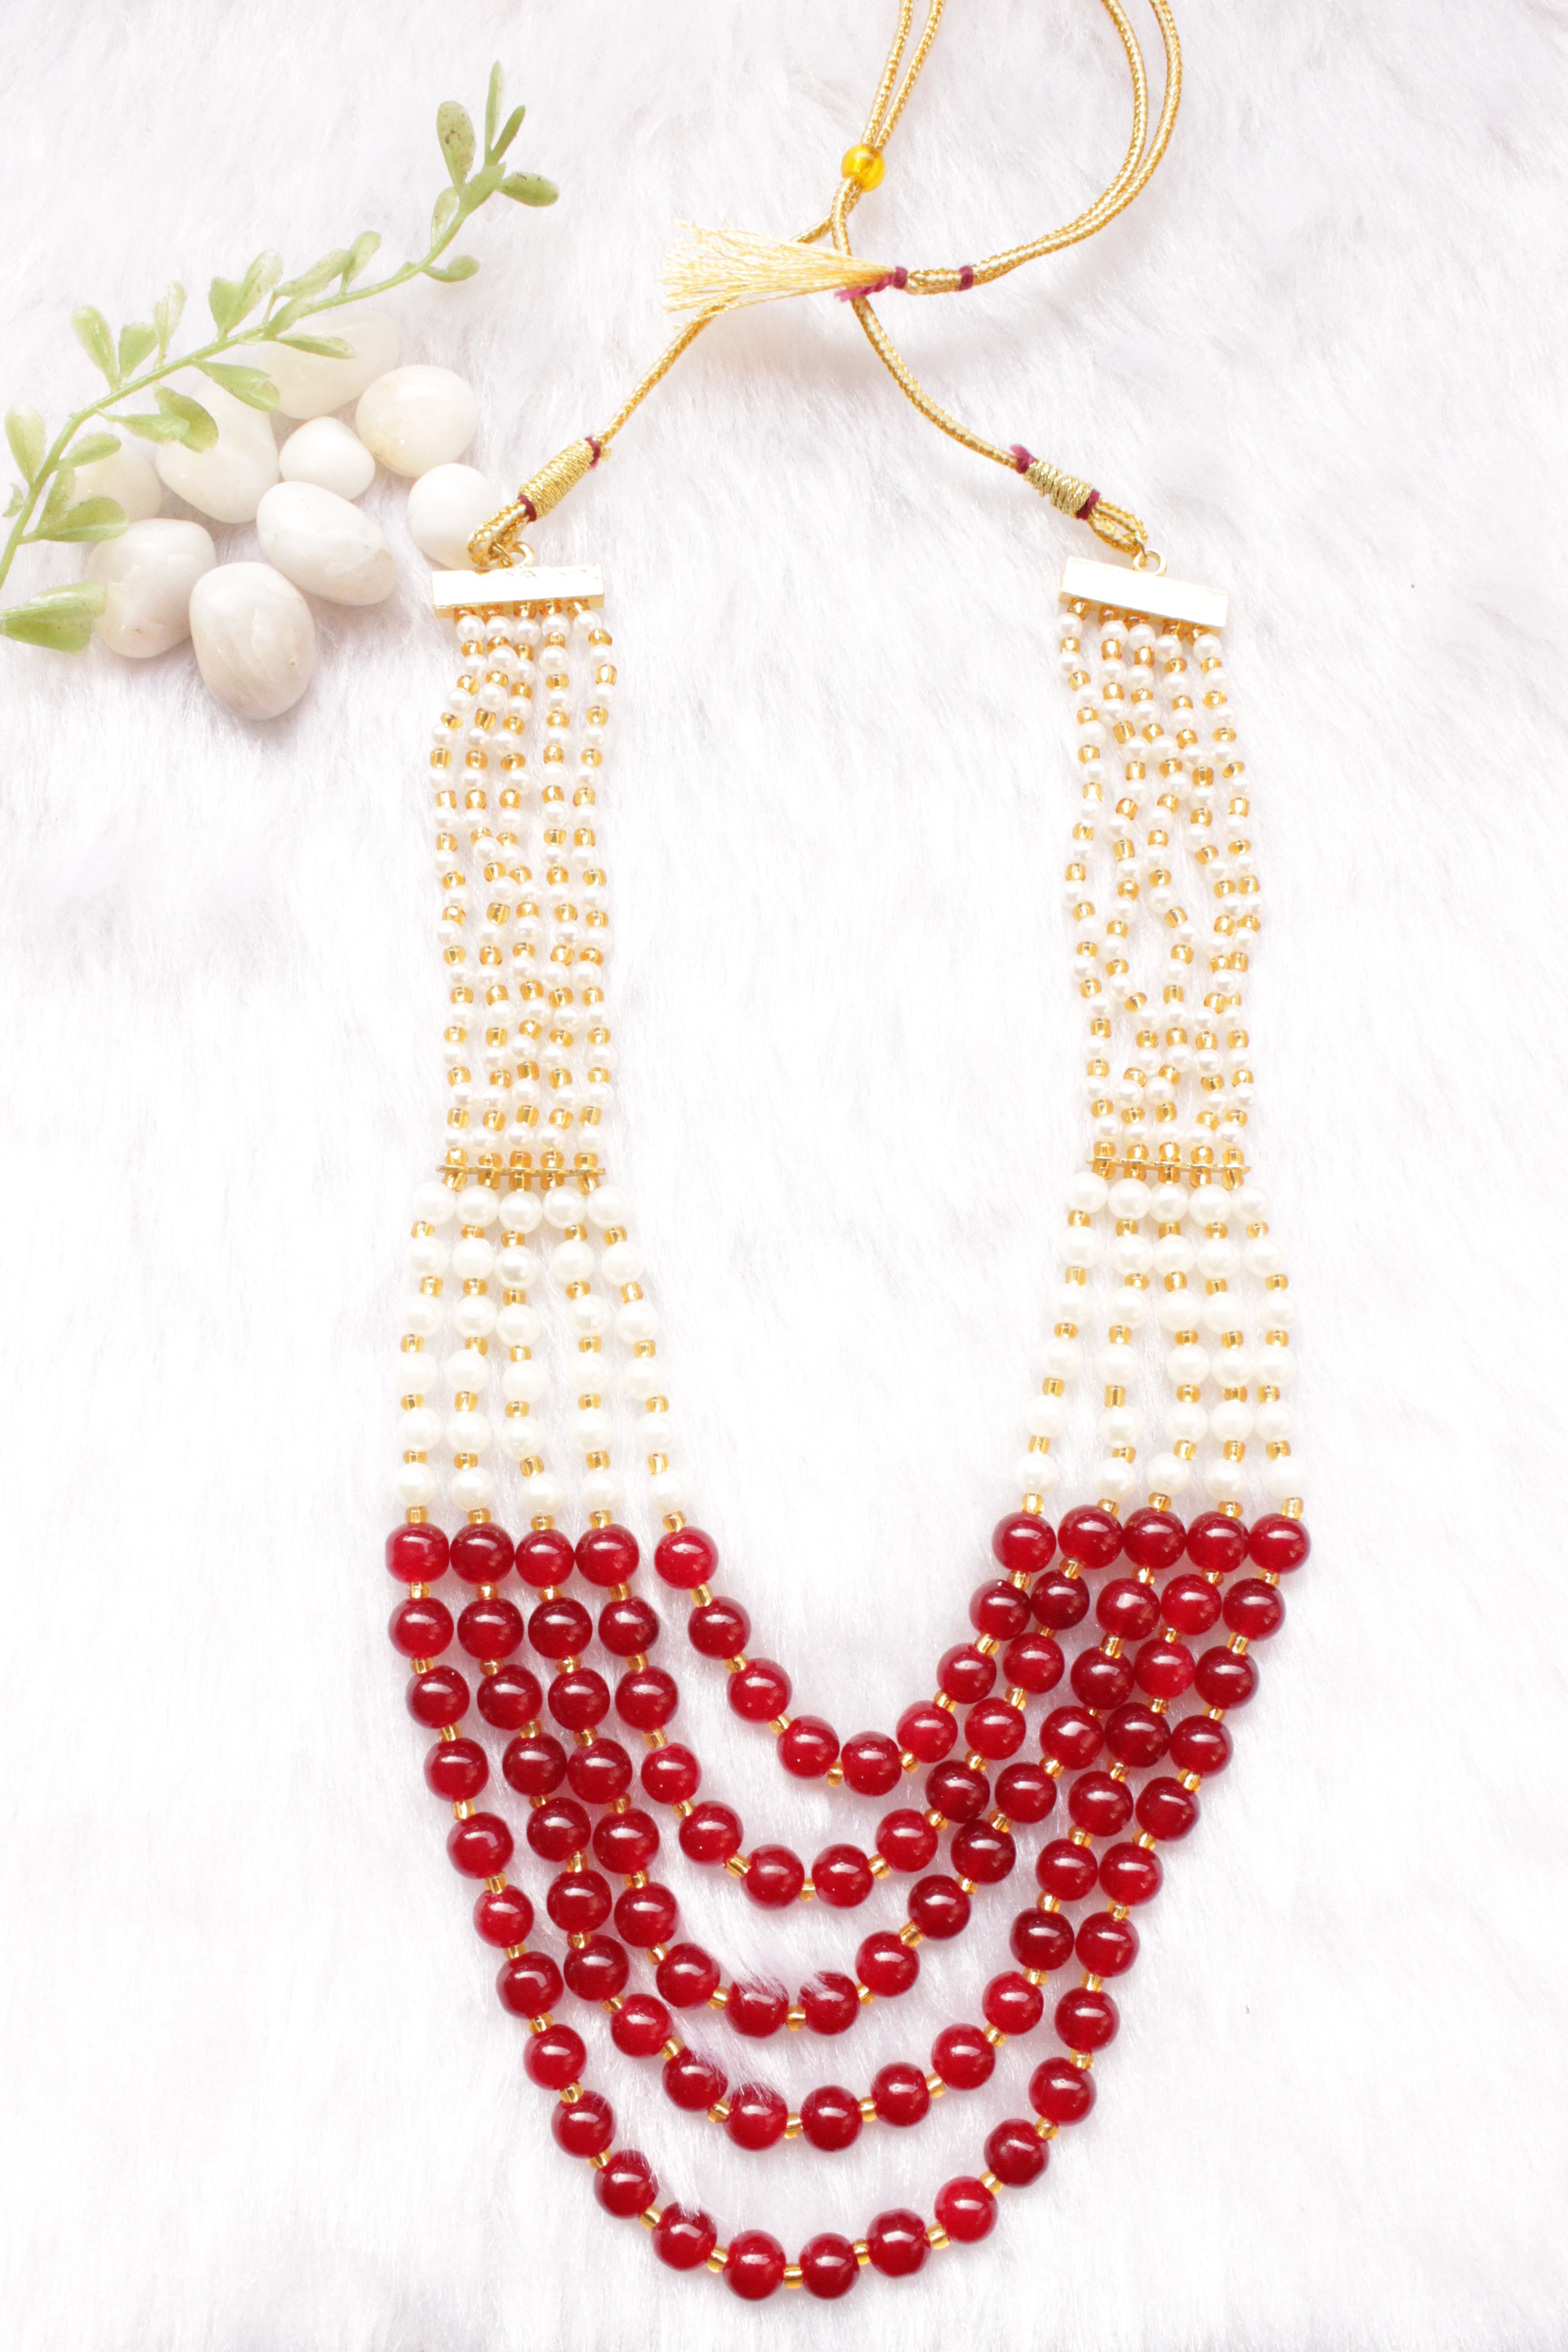 Red and White Glass Beads Braided with Gold Metal Beads 5 Layer Gold Finish Necklace